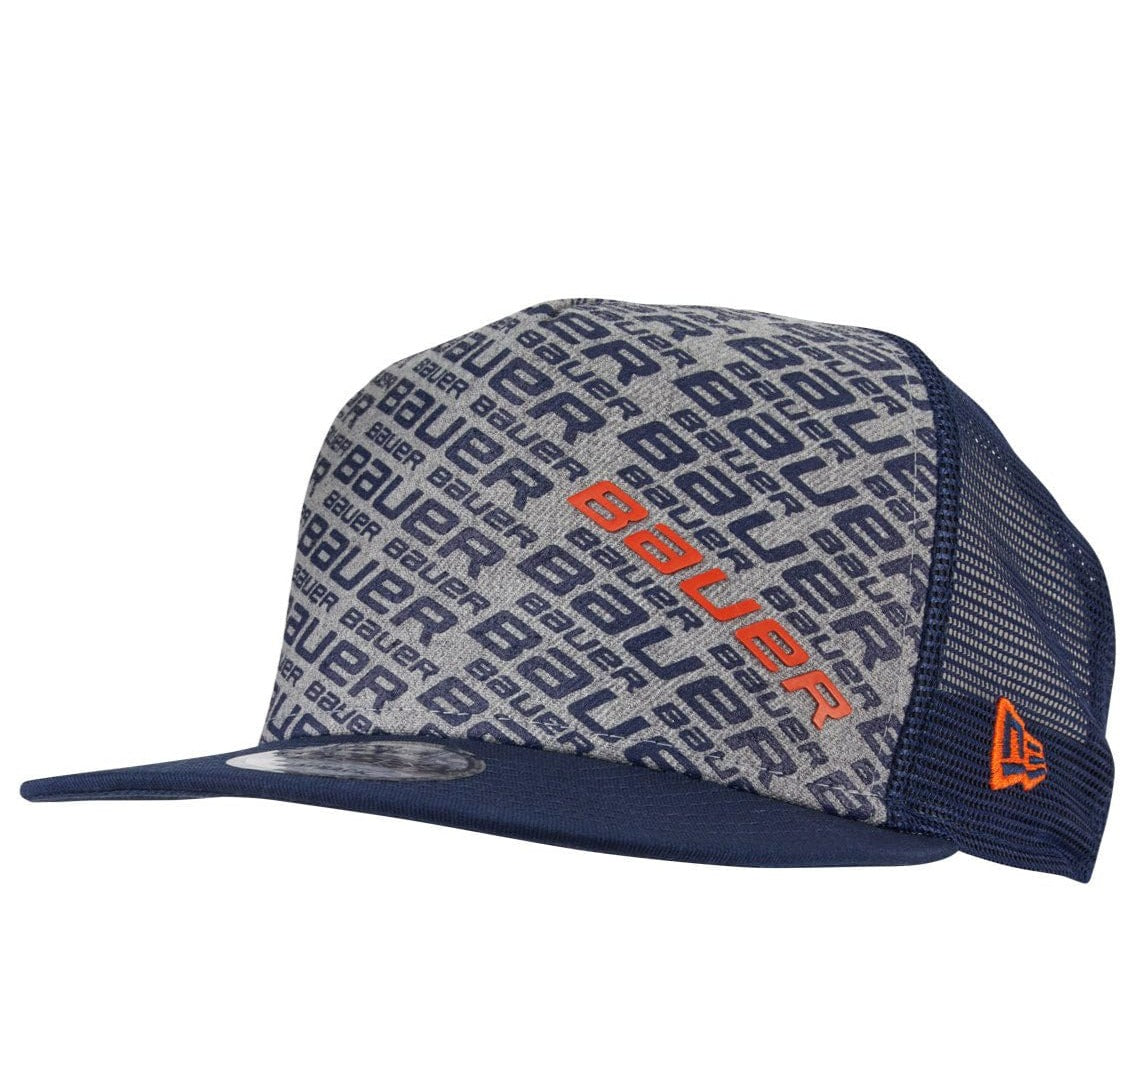 Bauer 9Fifty Snapback Repeat Hat